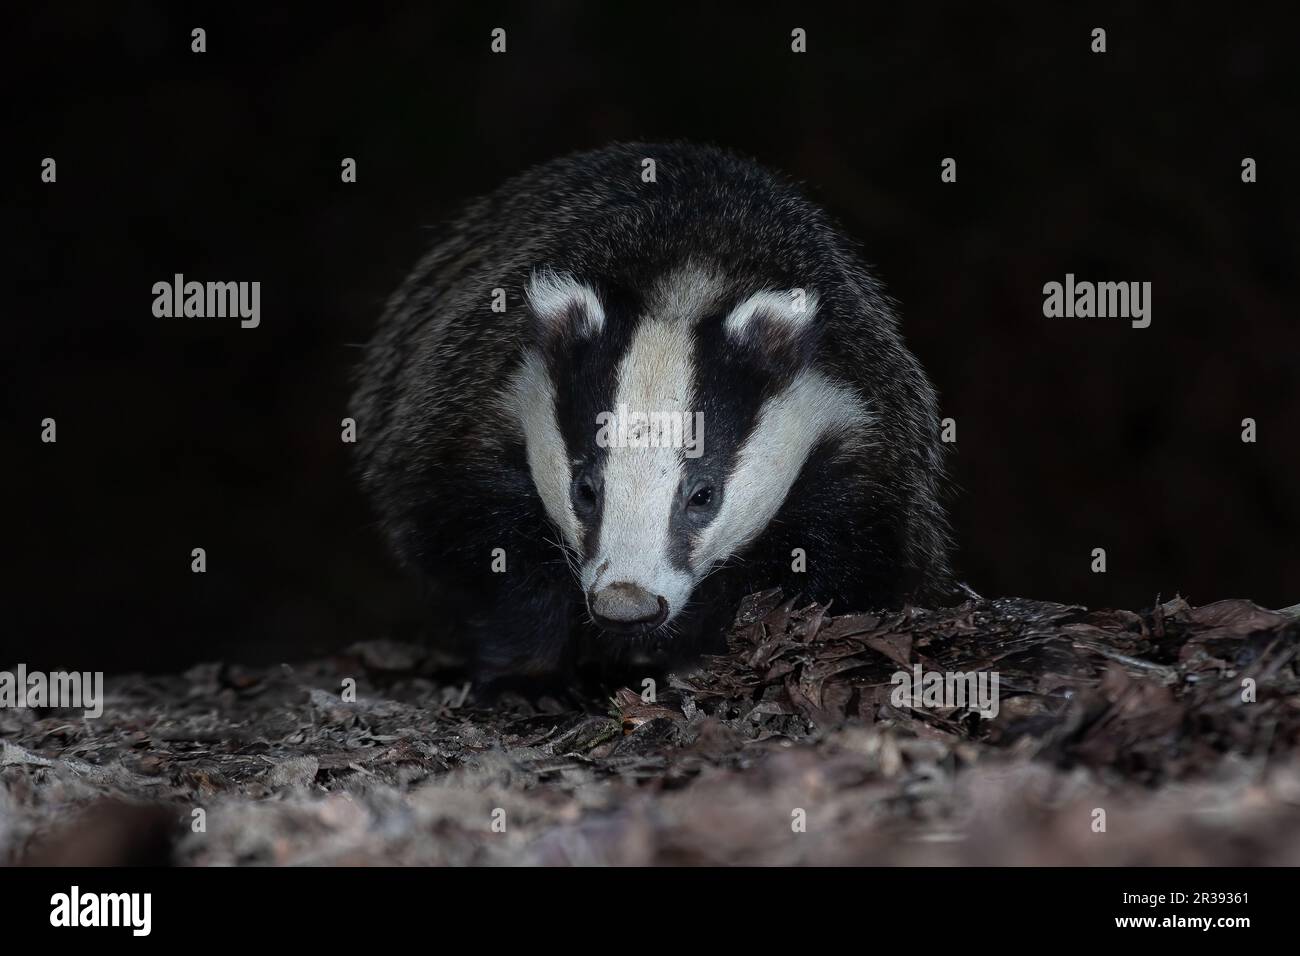 Taken from ground level, the image shows a badger close head on as it forages among the leaves at night. It has a dark plain background ideal for text Stock Photo